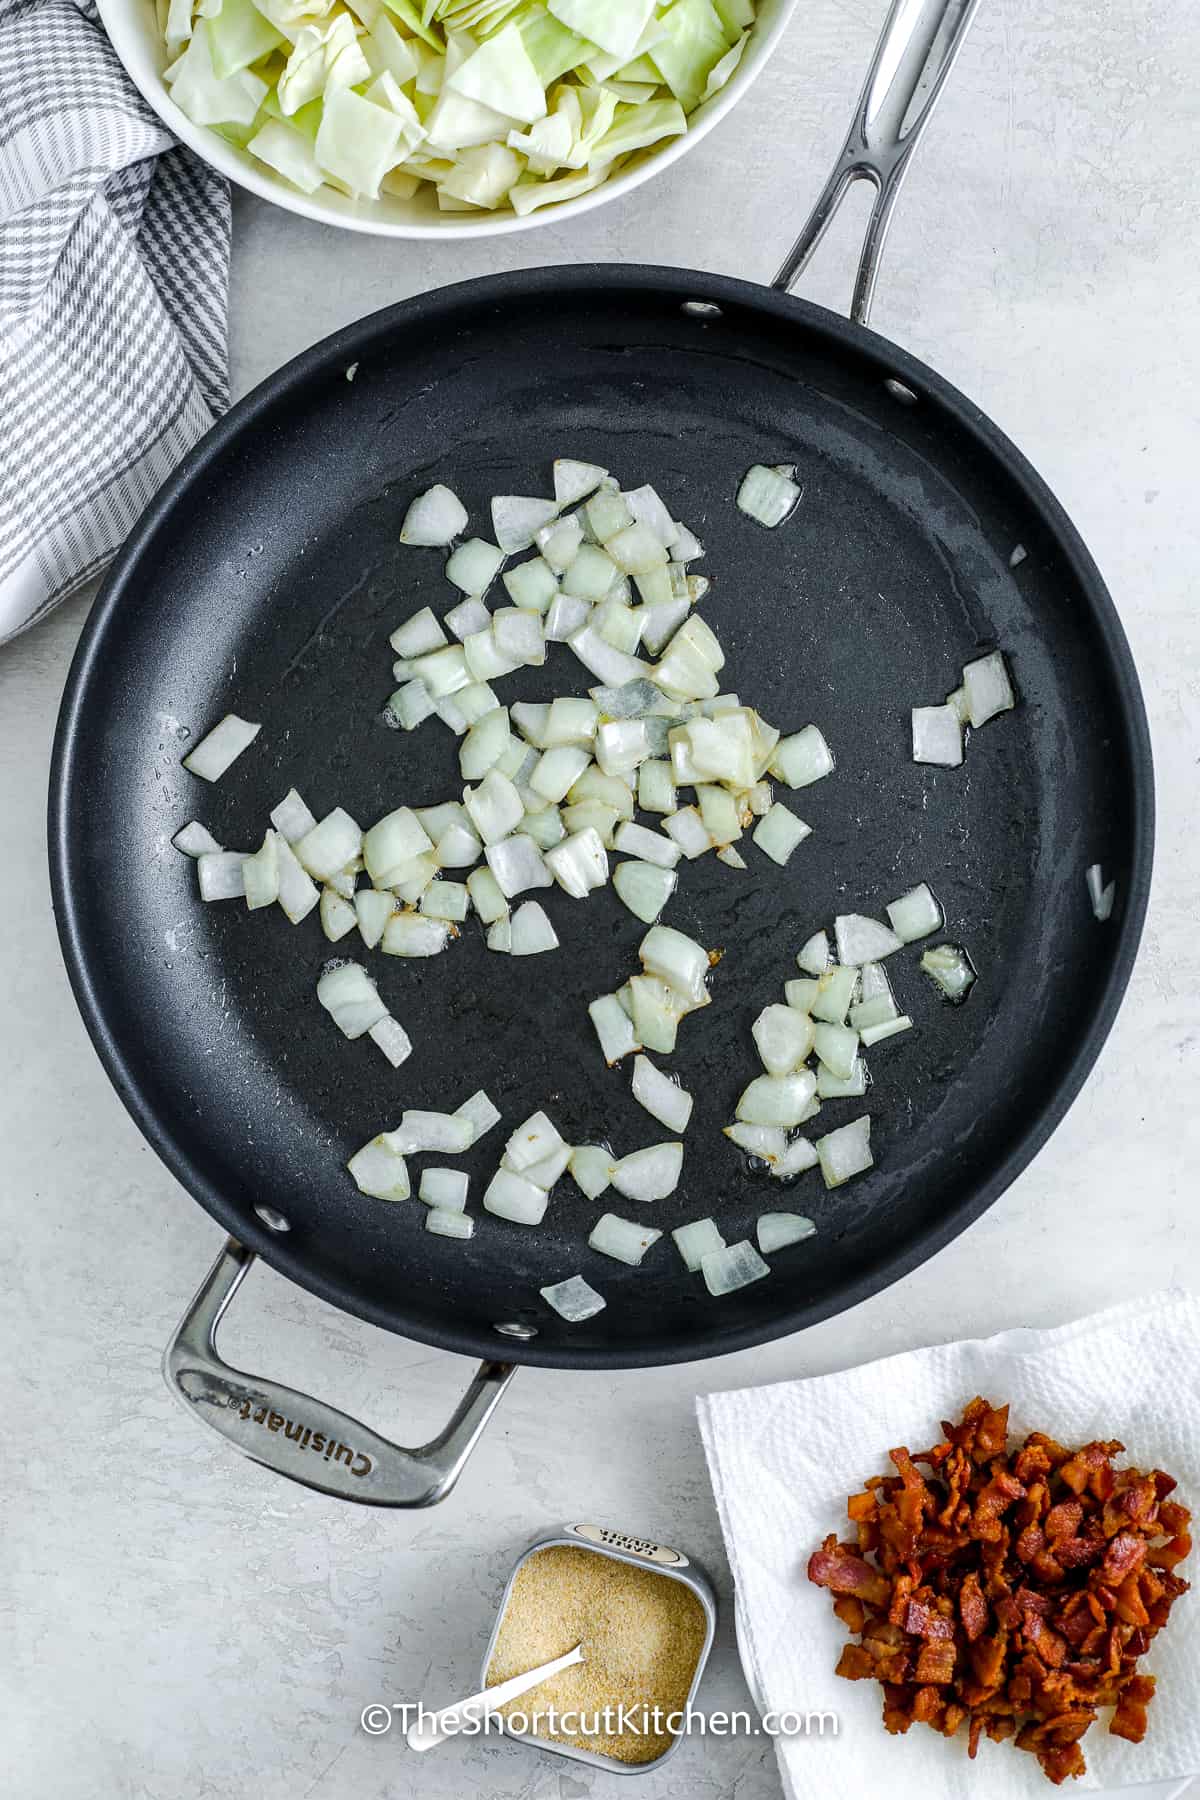 onions cooing in a frying pan